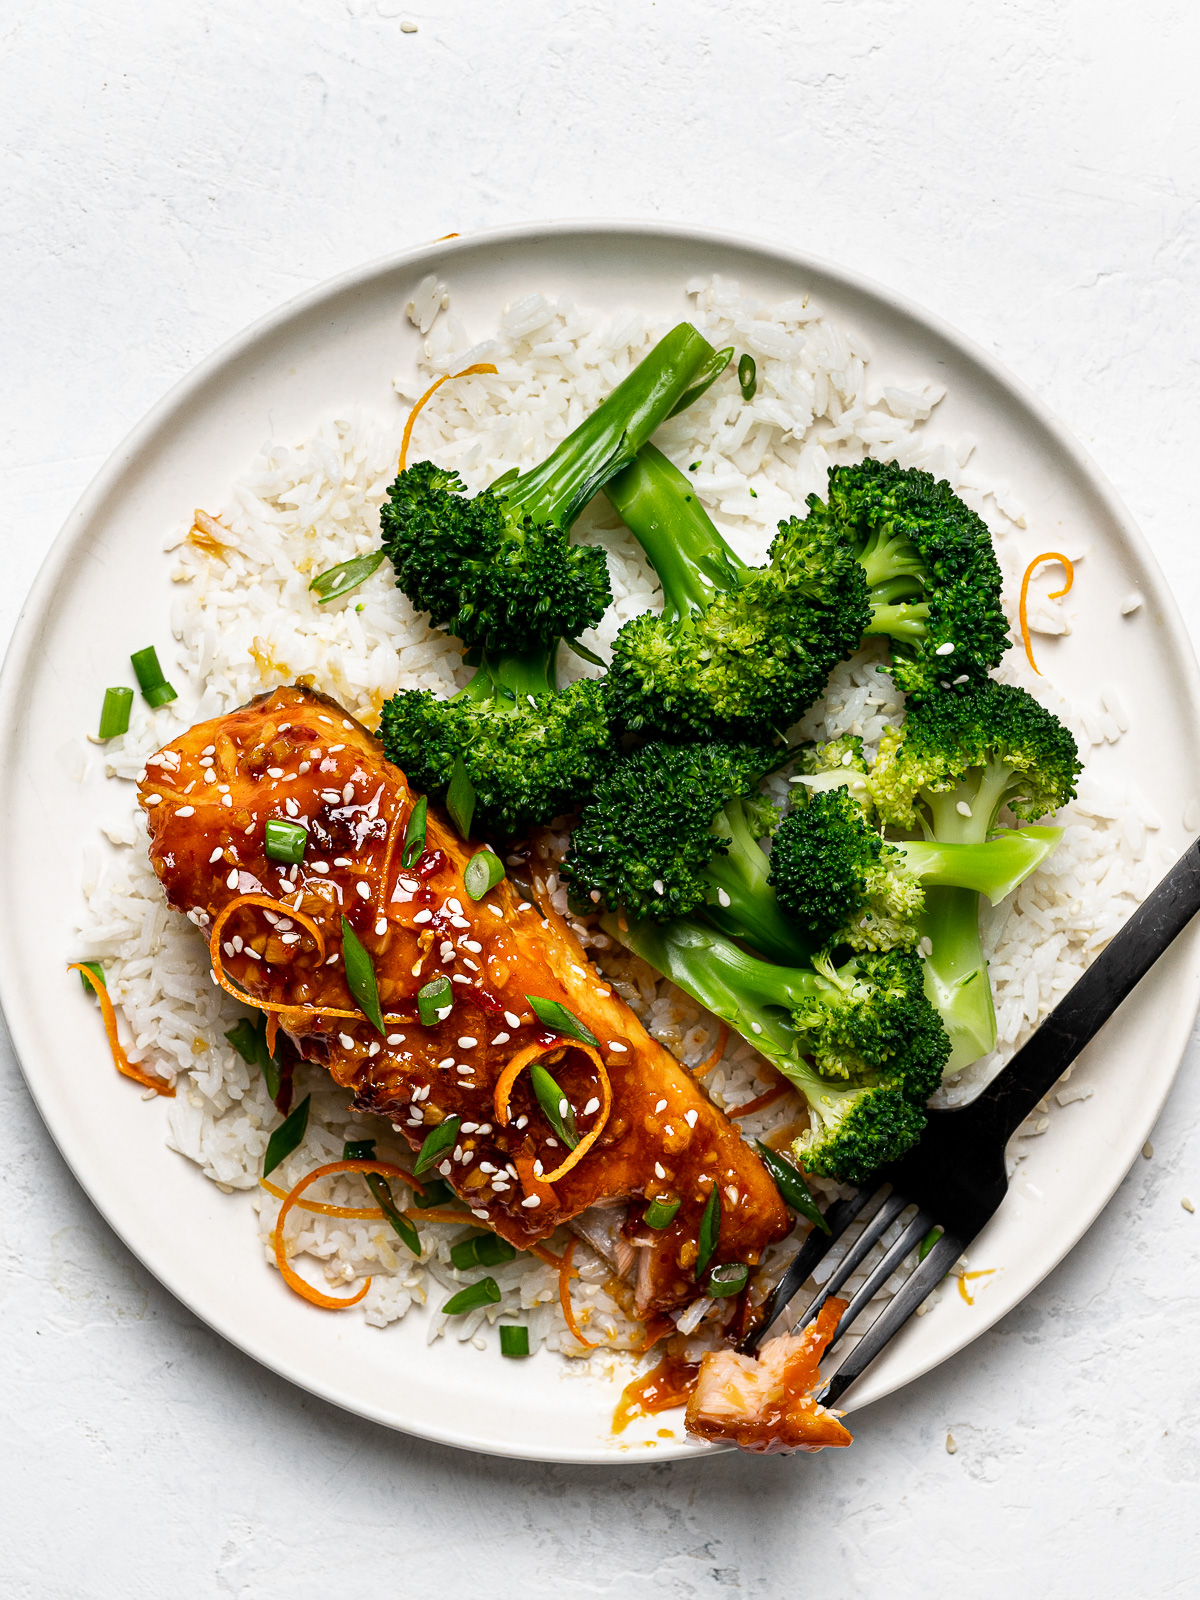 Spicy Tangerine Salmon served with rice and broccoli on plate